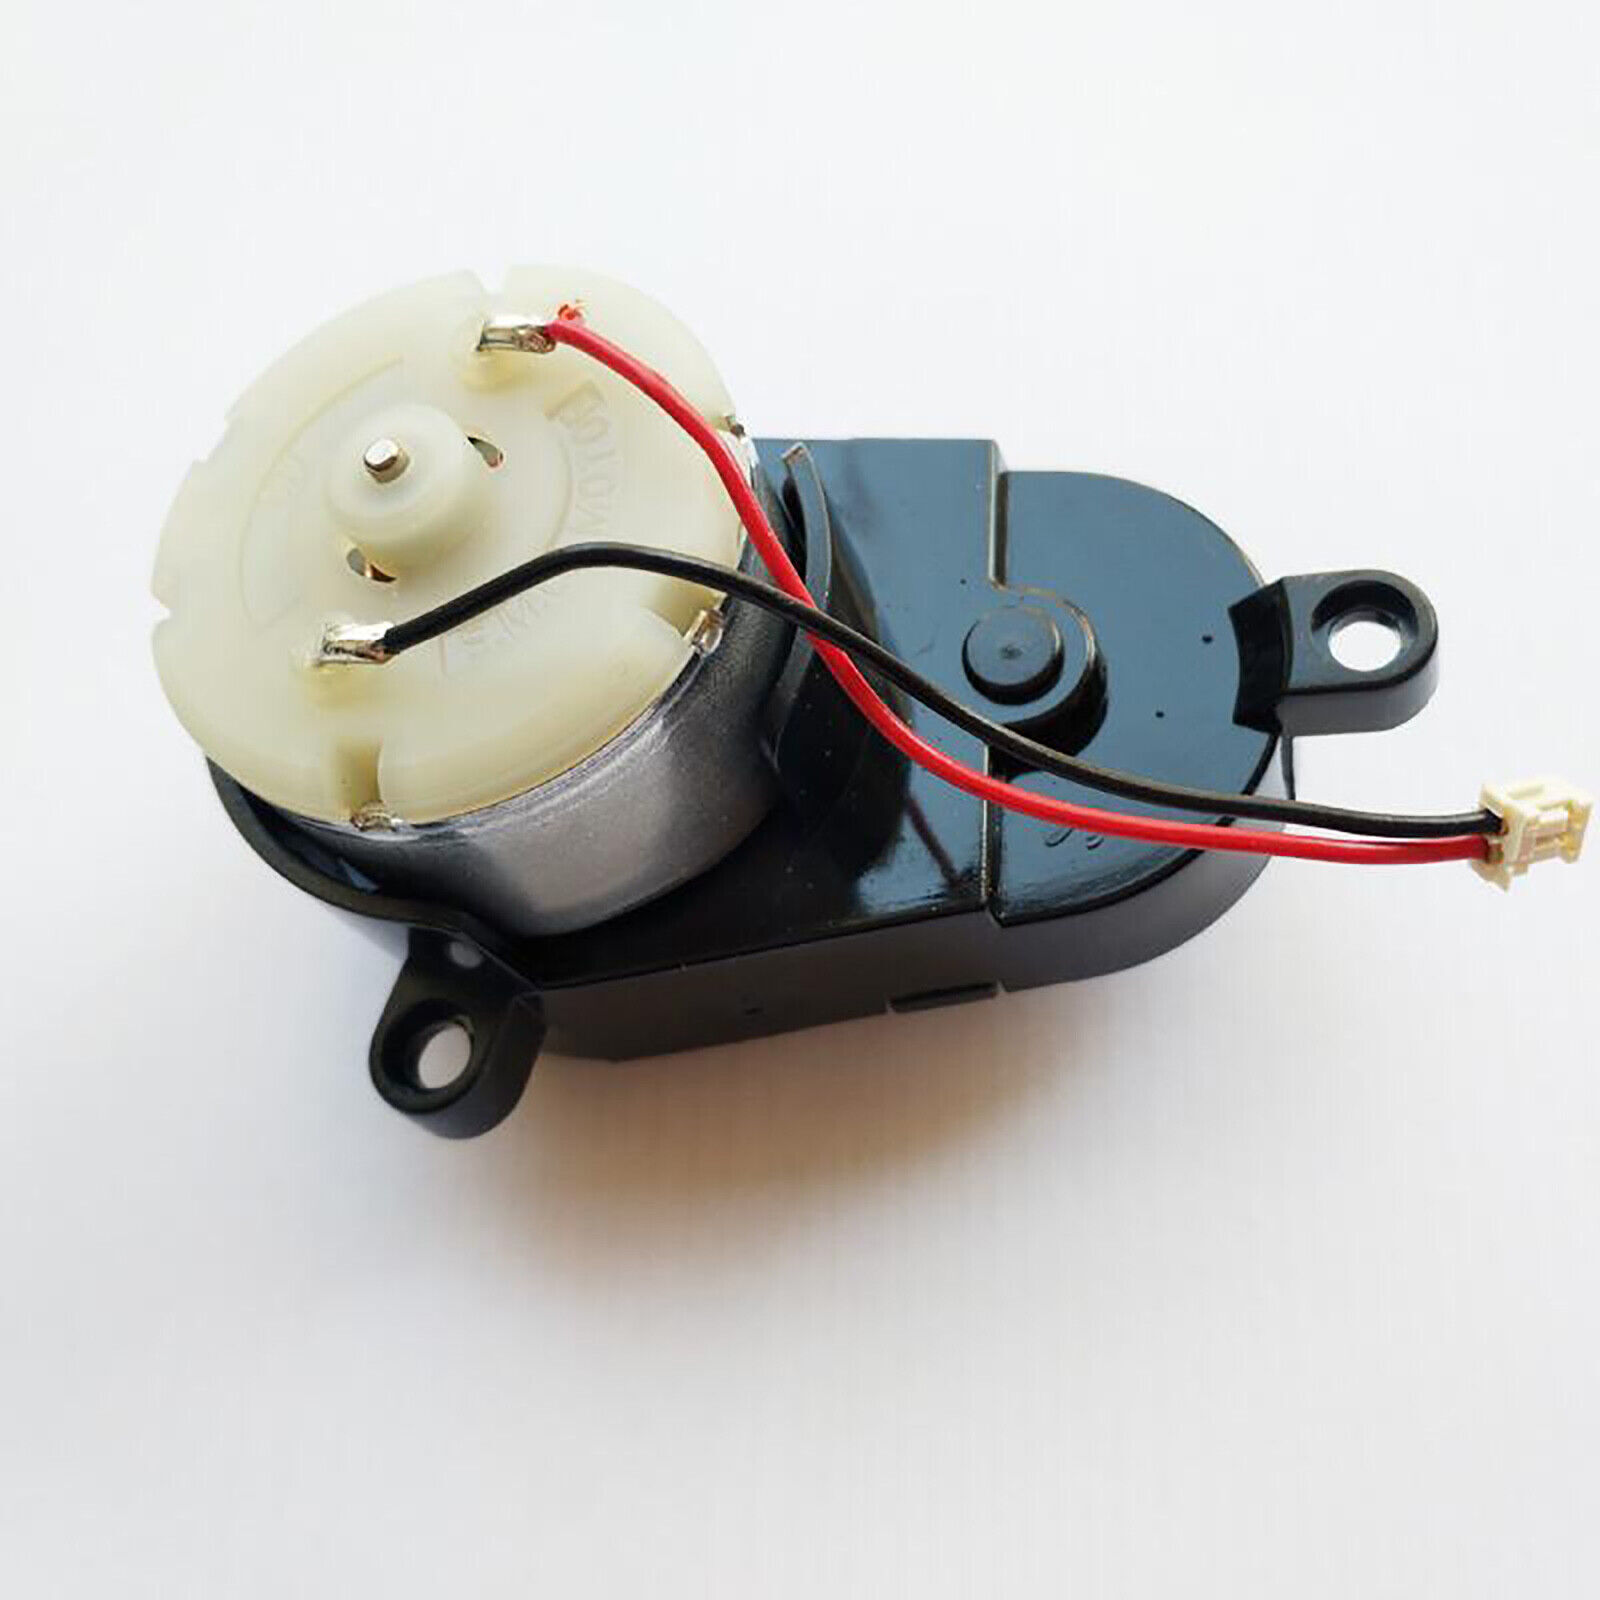 Brush motor for ECOVACS DN620 621 DH35 45 43 DS625 sweeper vacuum cleaner Condition New Marke Markenlos Markenkompatibi